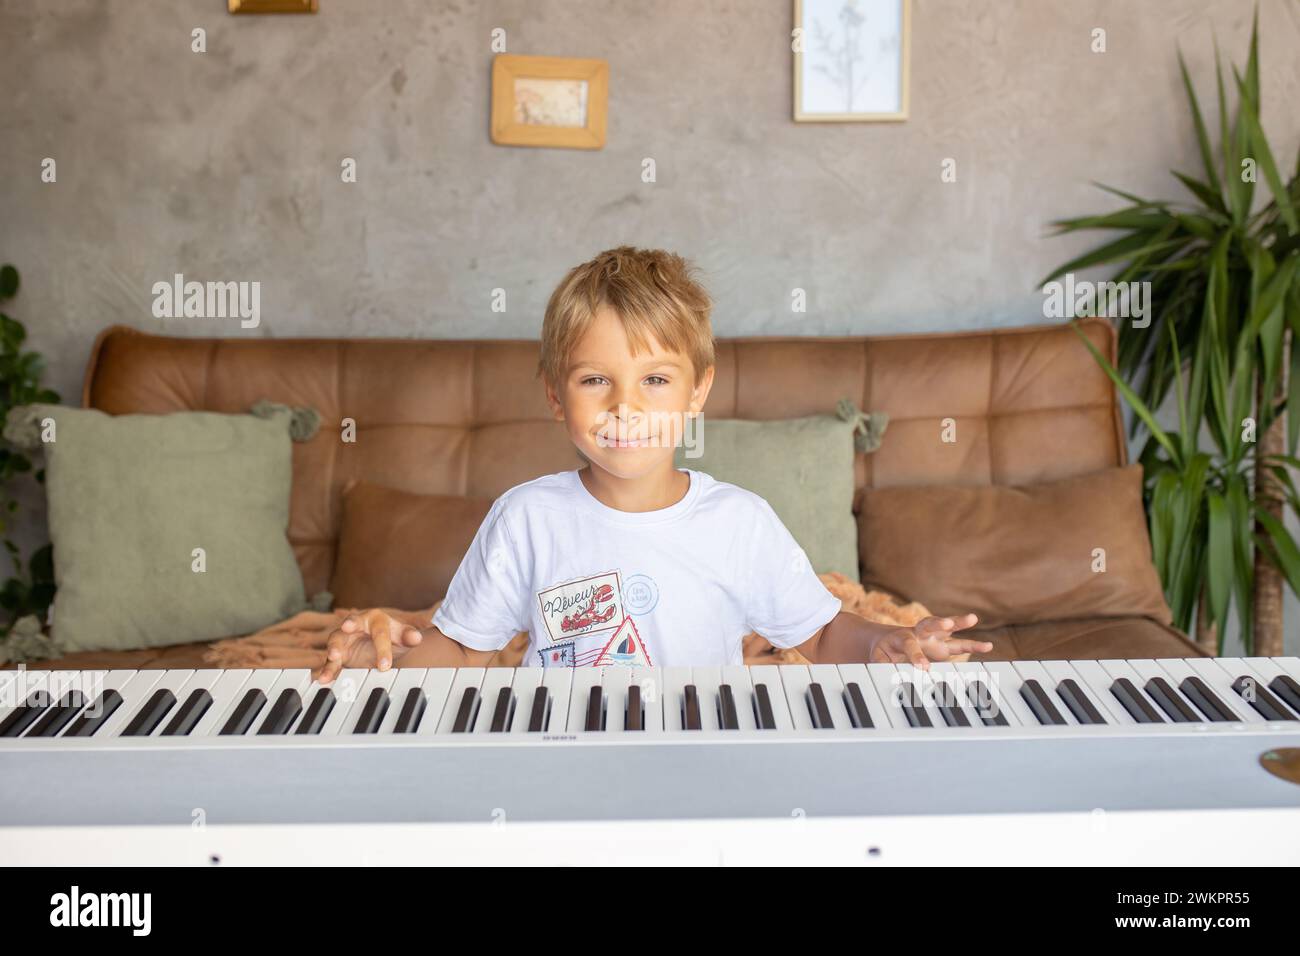 Child, blond boy, playing piano at home, learning Stock Photo